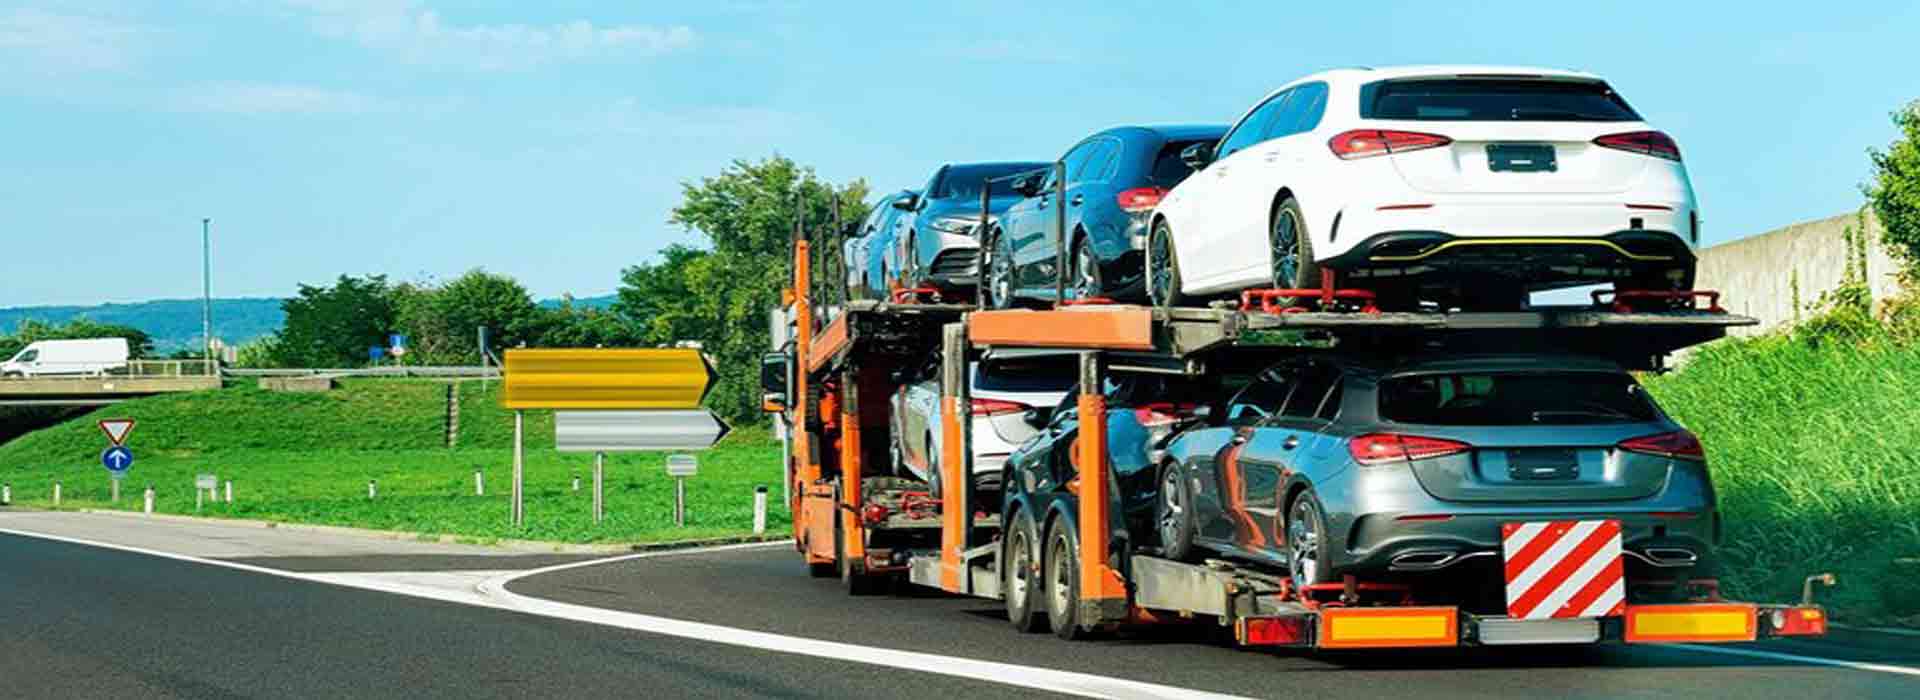 towing service in brisbane area